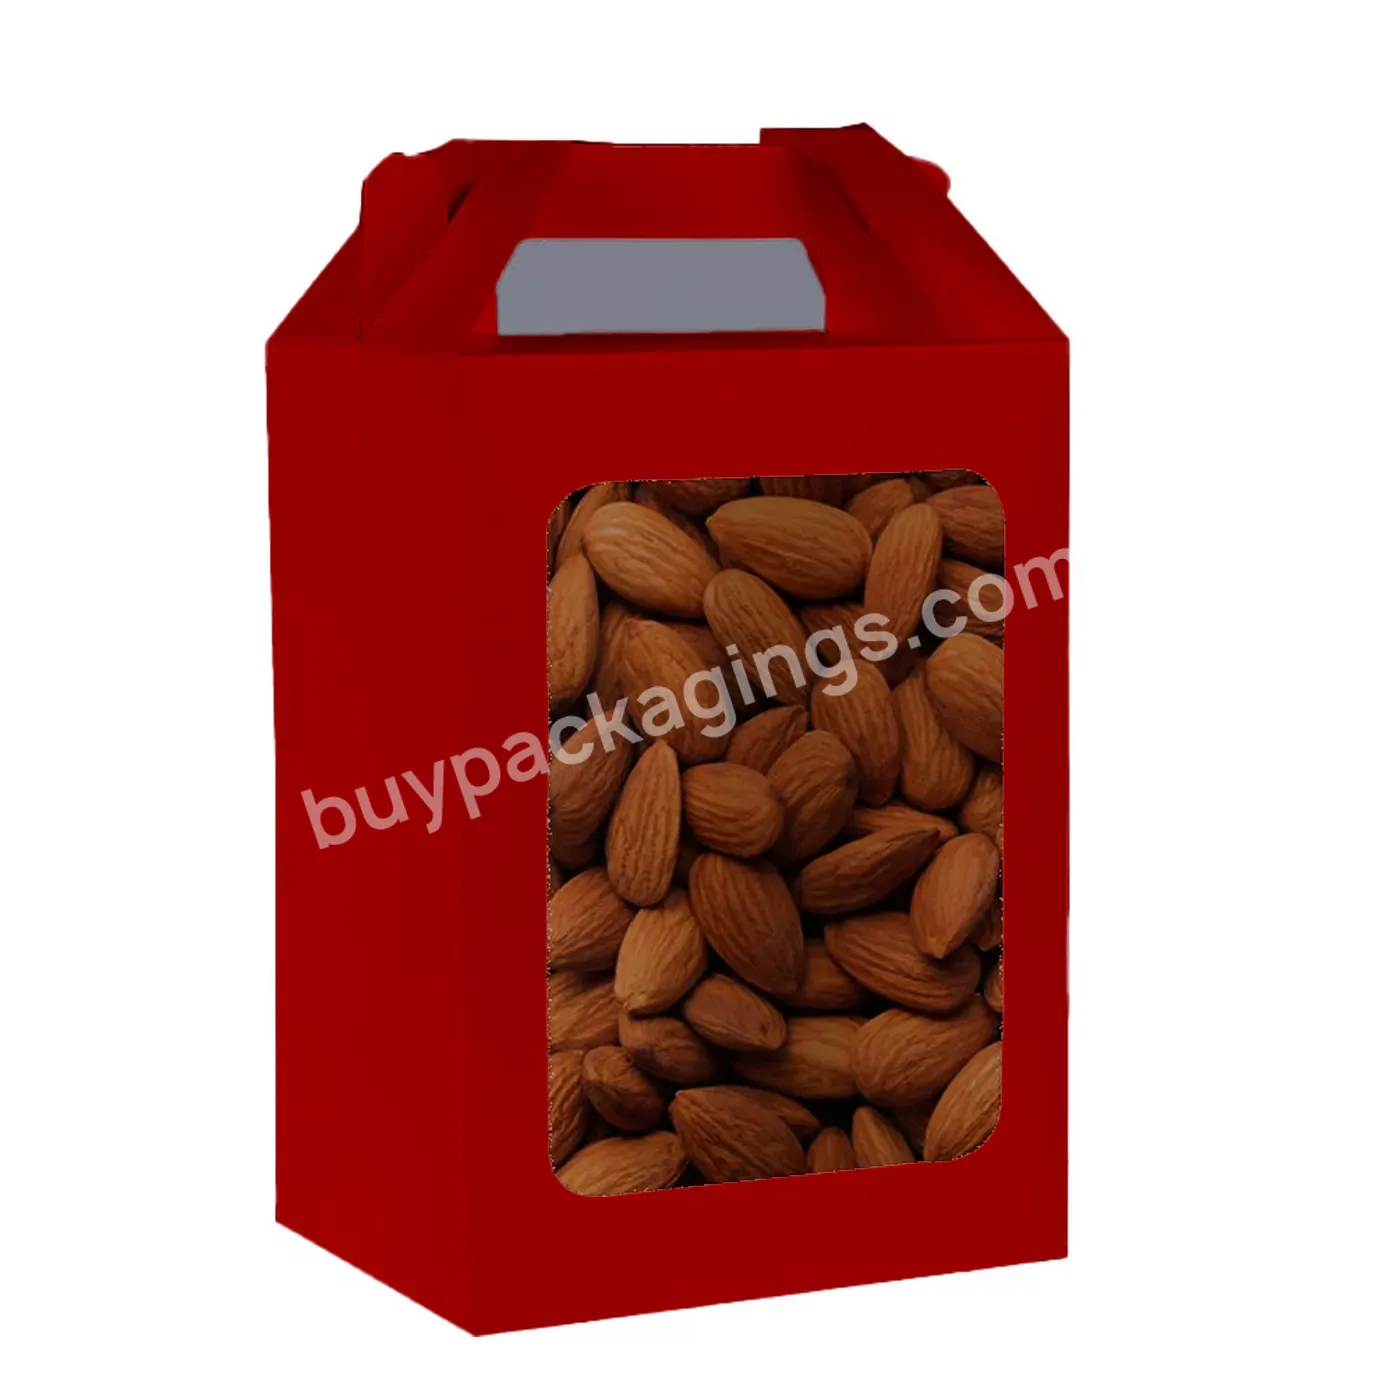 Custom Printed Cardboard Display Red Nuts Paper Box Gifts Foldable Carton Assorted Gift Nut Canada Gift Nuts Packing Box - Buy Nuts Packing Box,Nut Canada Gift Box,Assorted Nuts Gift Box.